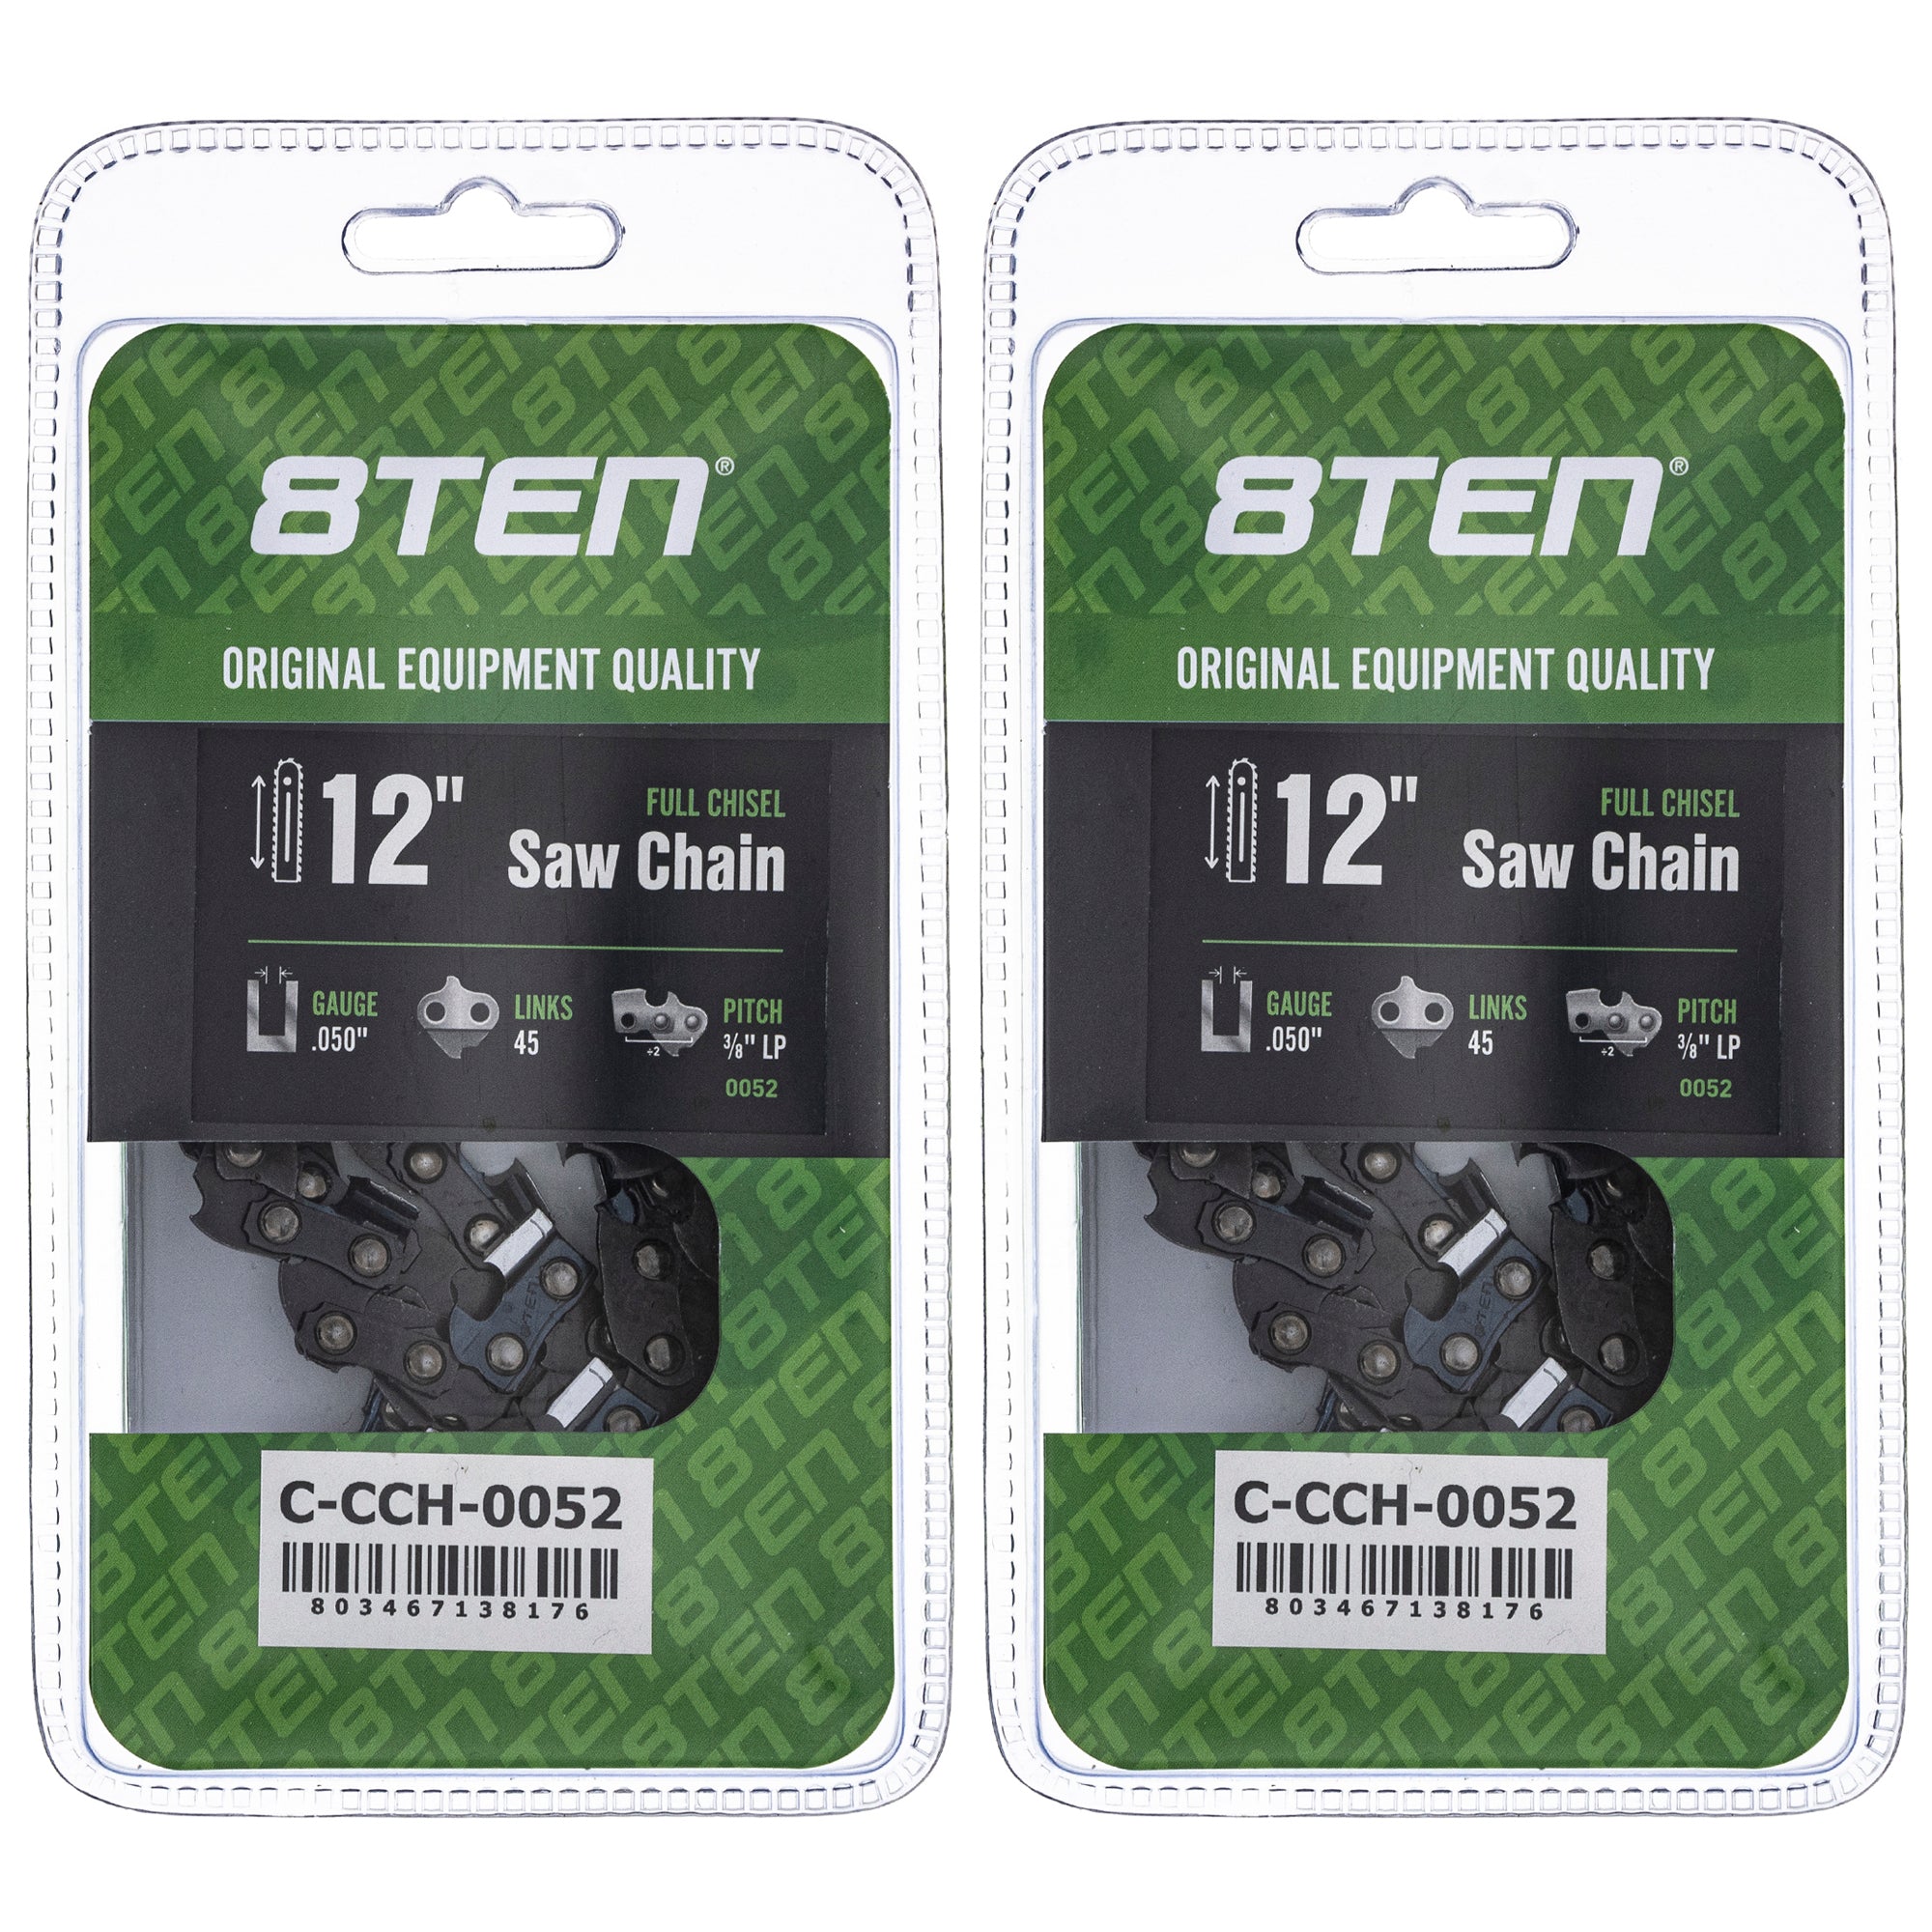 Chainsaw Chain 12 Inch .050 3/8 LP 45DL 2-Pack for zOTHER Stens Oregon Ref. Oregon 8TEN 810-CCC2274H